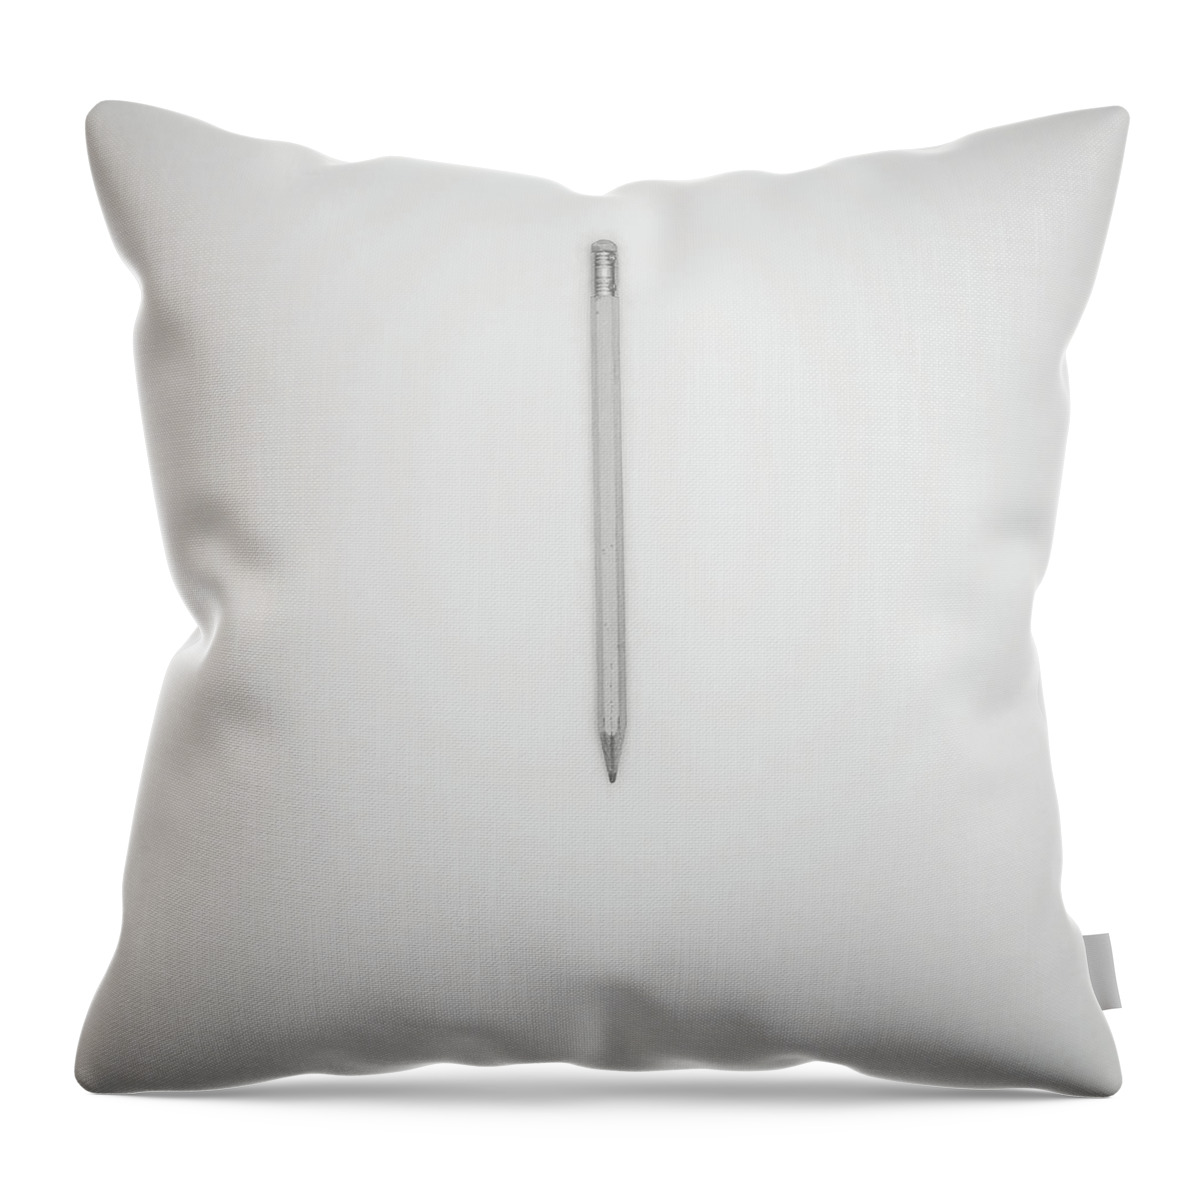 Pencil Throw Pillow featuring the photograph Pencil on a Blank Page by Scott Norris